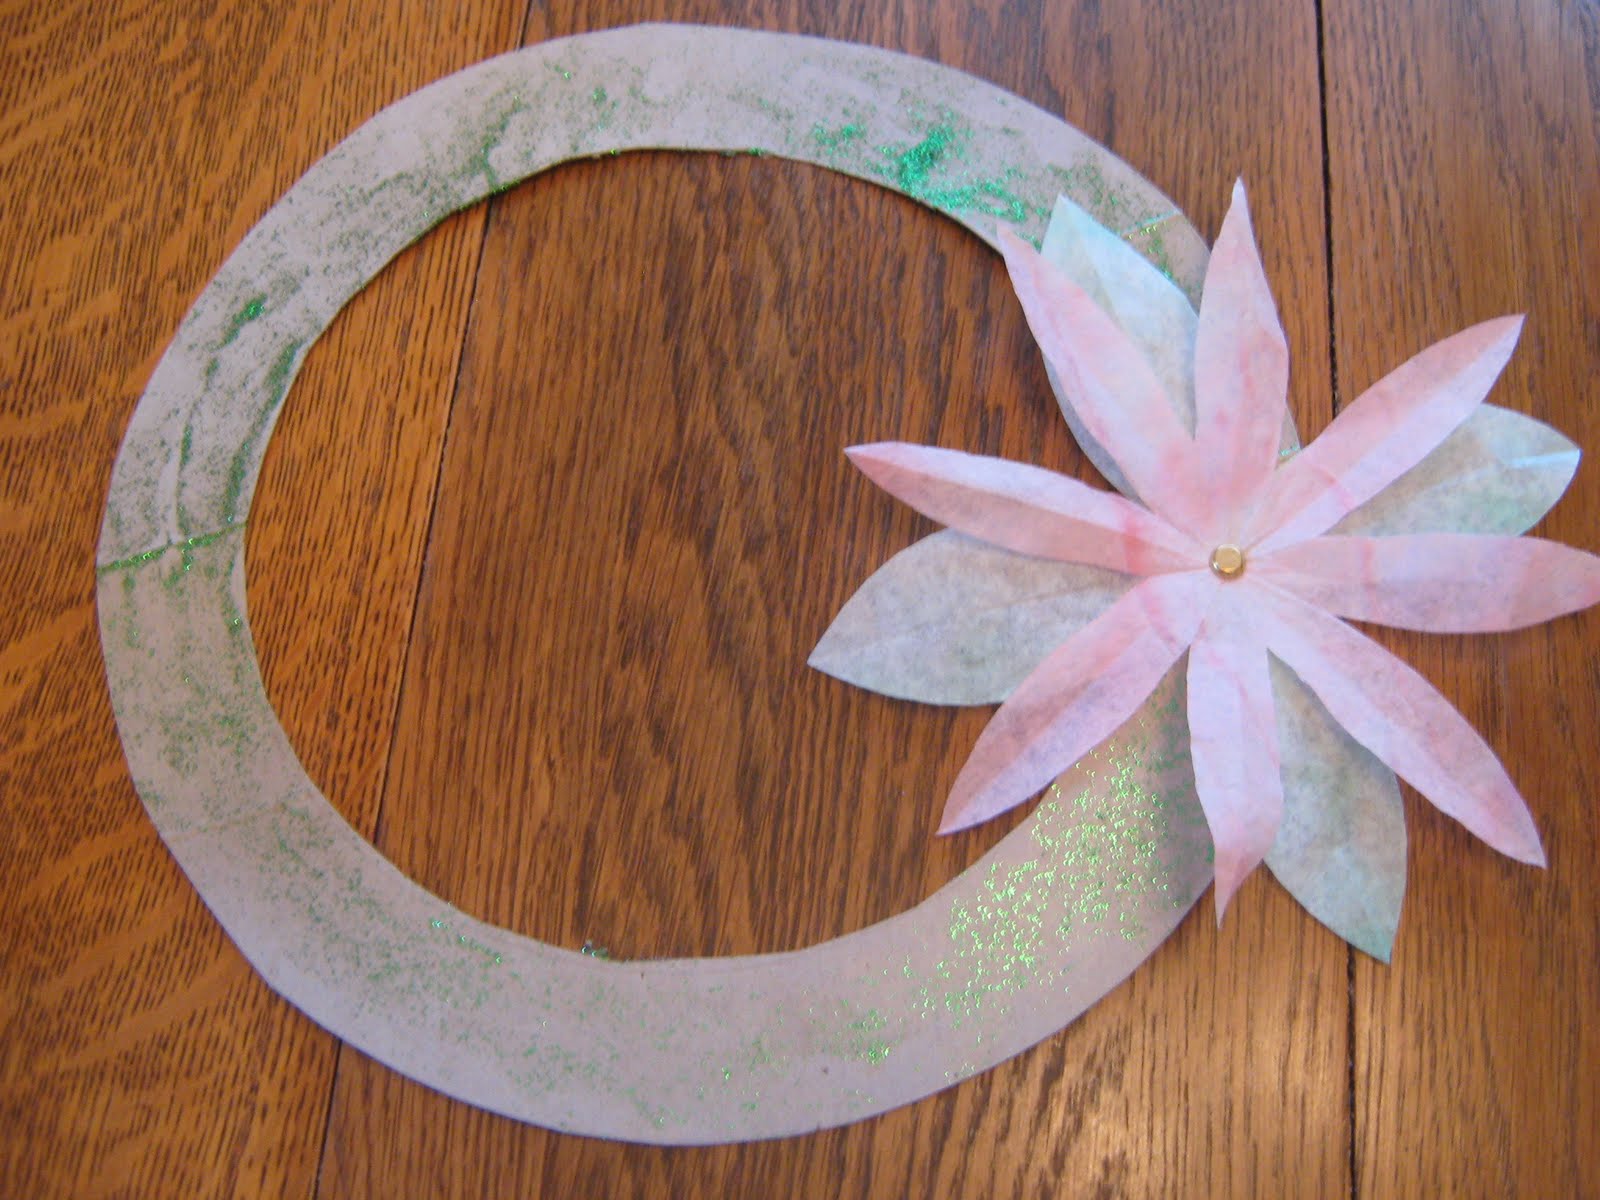 Construction Paper Poinsettias - Frugal Fun For Boys and Girls